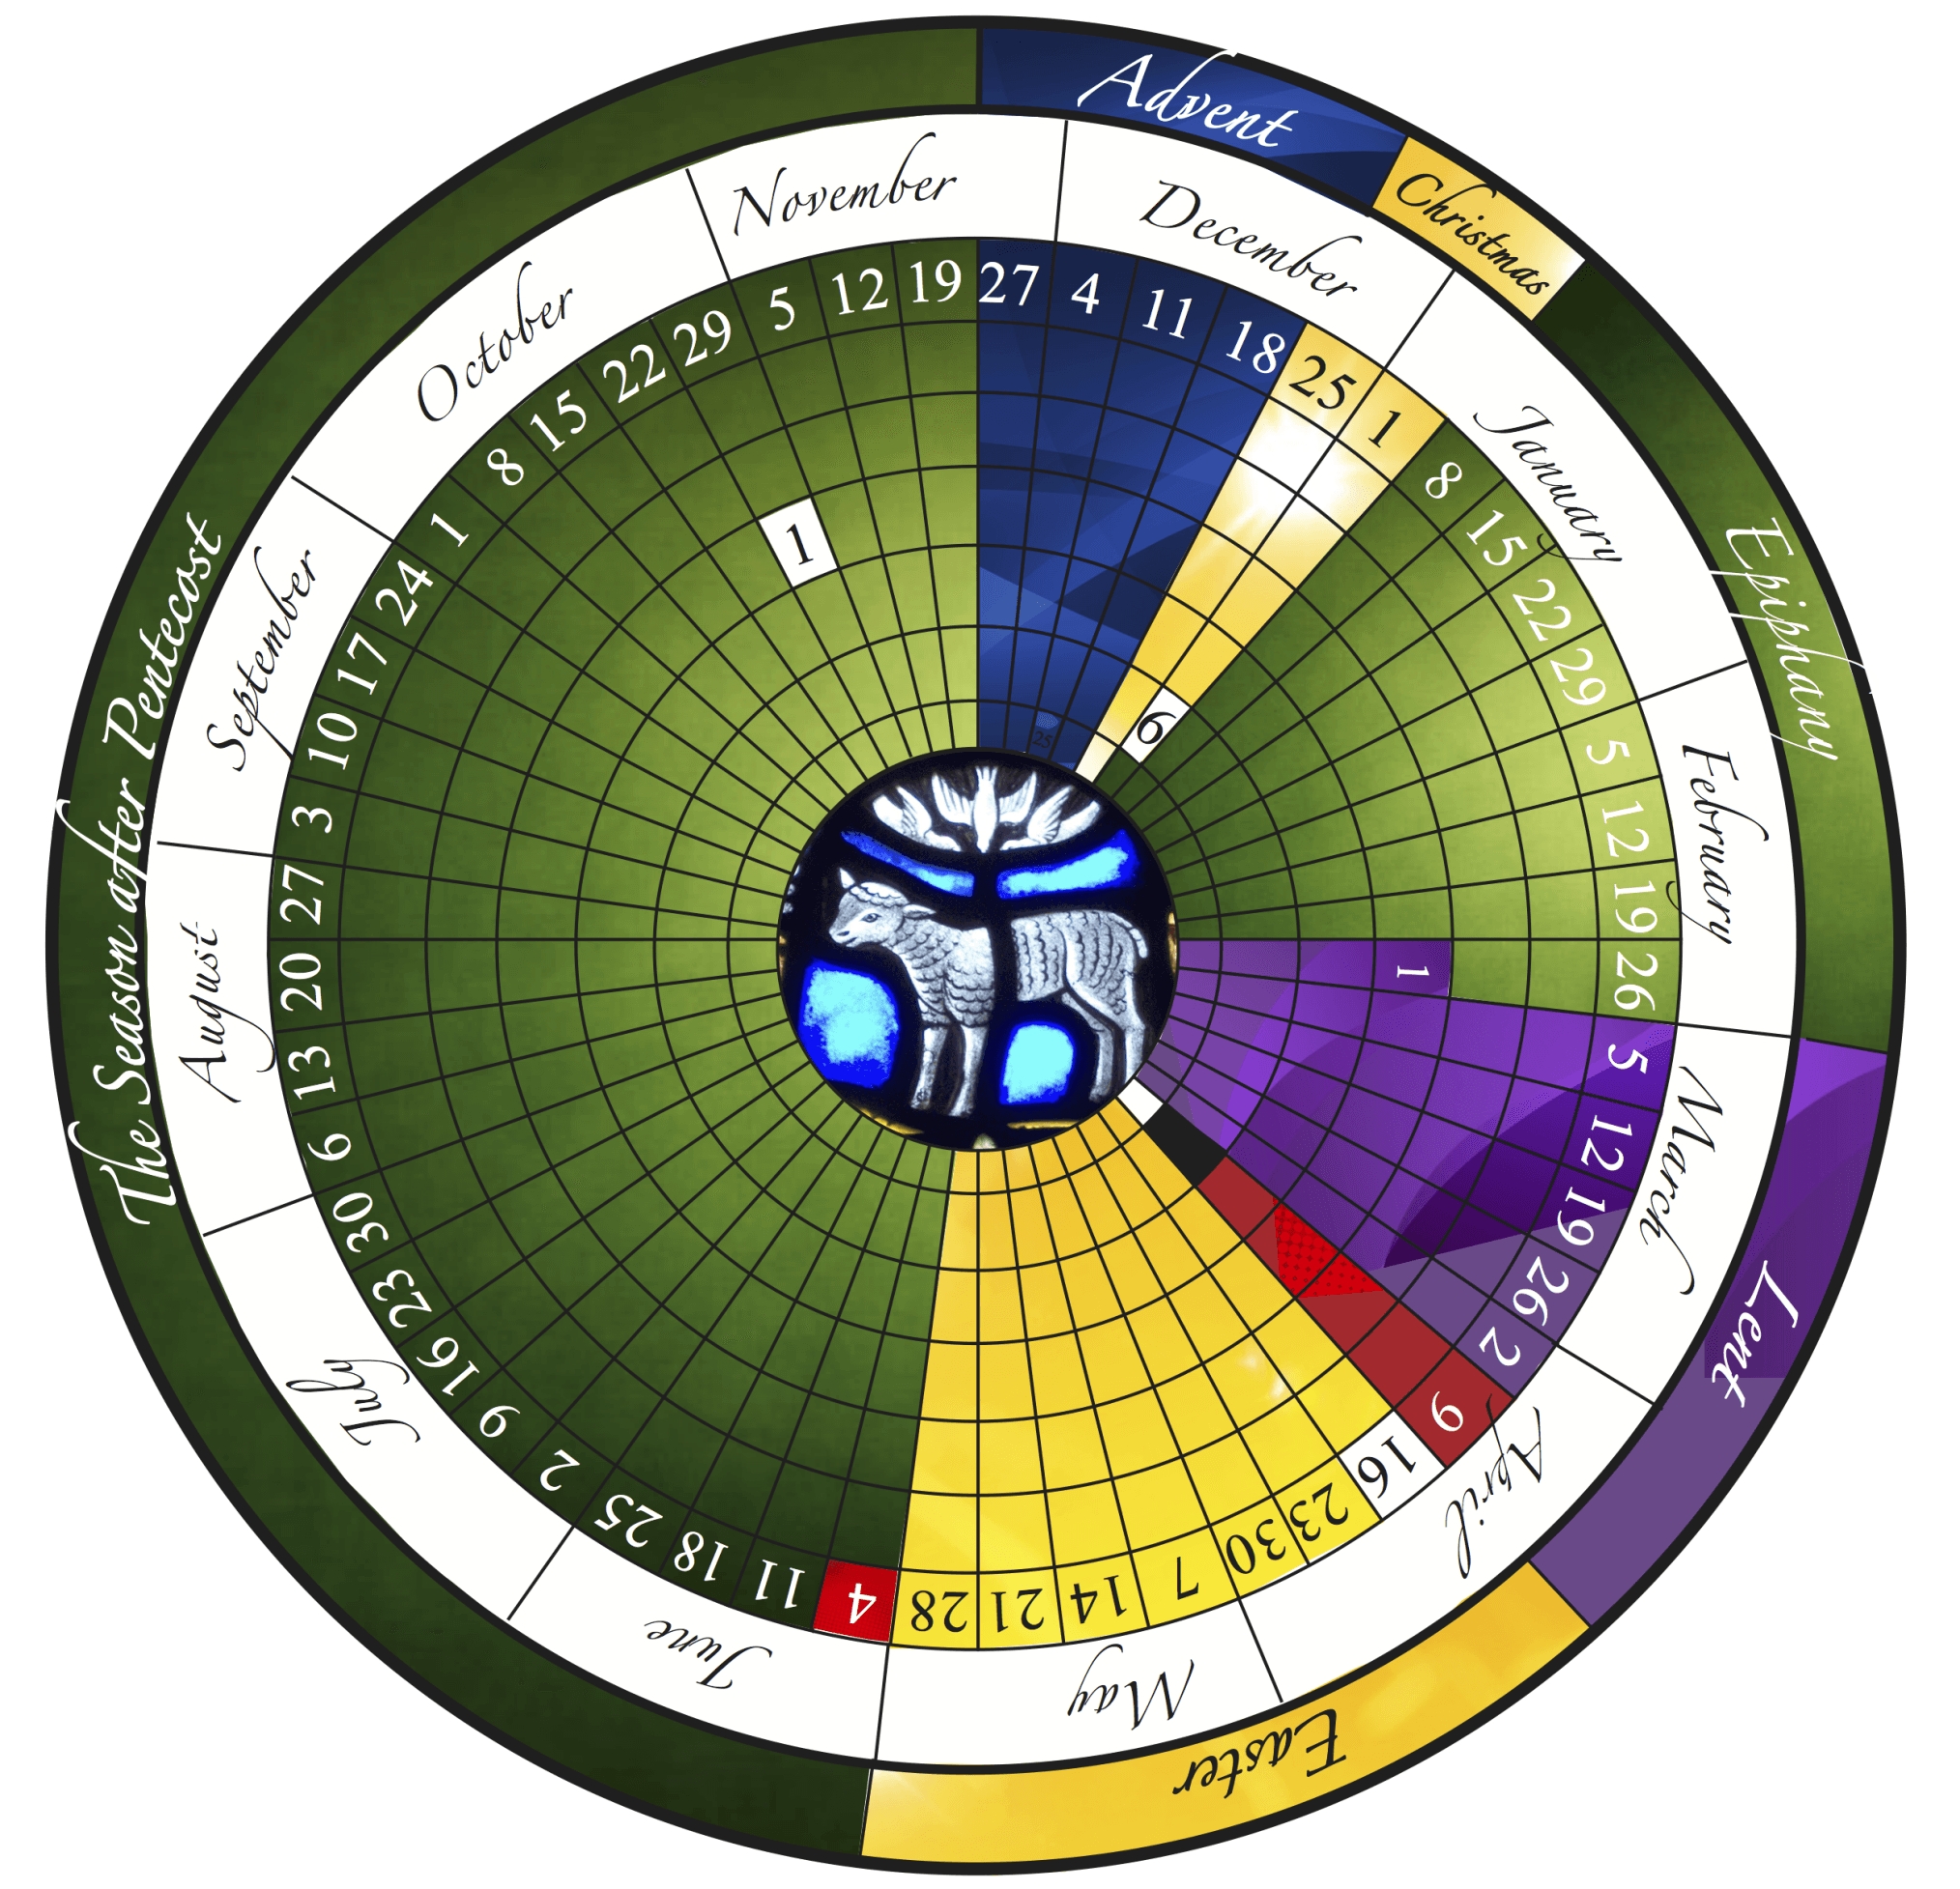 The Liturgical Year Explained (Plus Free Printable Calendar!) in The Year 2020 Liturgical Calendar